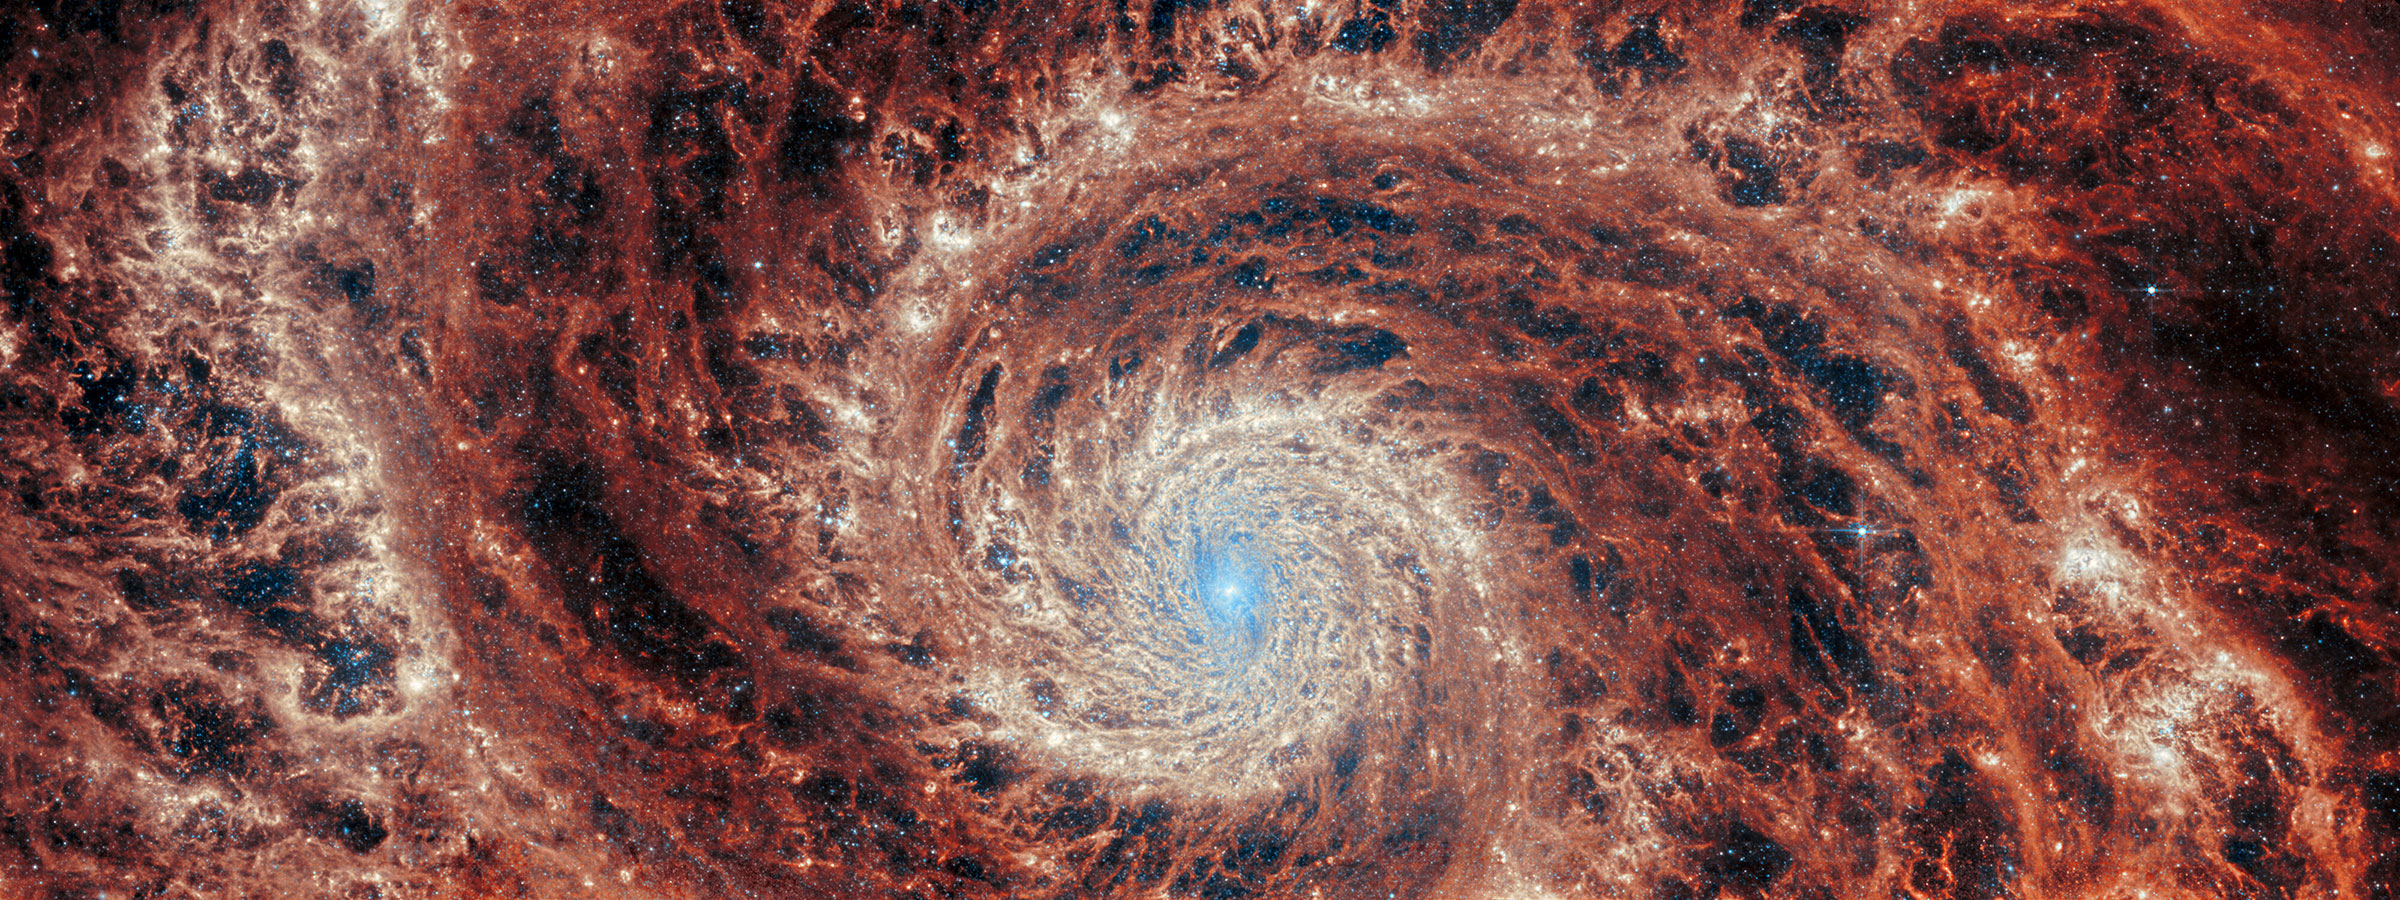 Webb's mid-infrared view of galaxy M51. A large spiral galaxy takes up the entirety of the image. The core is mostly bright white, but there are also swirling, detailed structures that resemble water circling a drain. There is white and pale blue light that emanates from stars and dust at the core’s center, but it is tightly limited to the core. The detailed rings feature bands of deep orange and cloudy gray, which are interspersed by darker empty regions throughout.